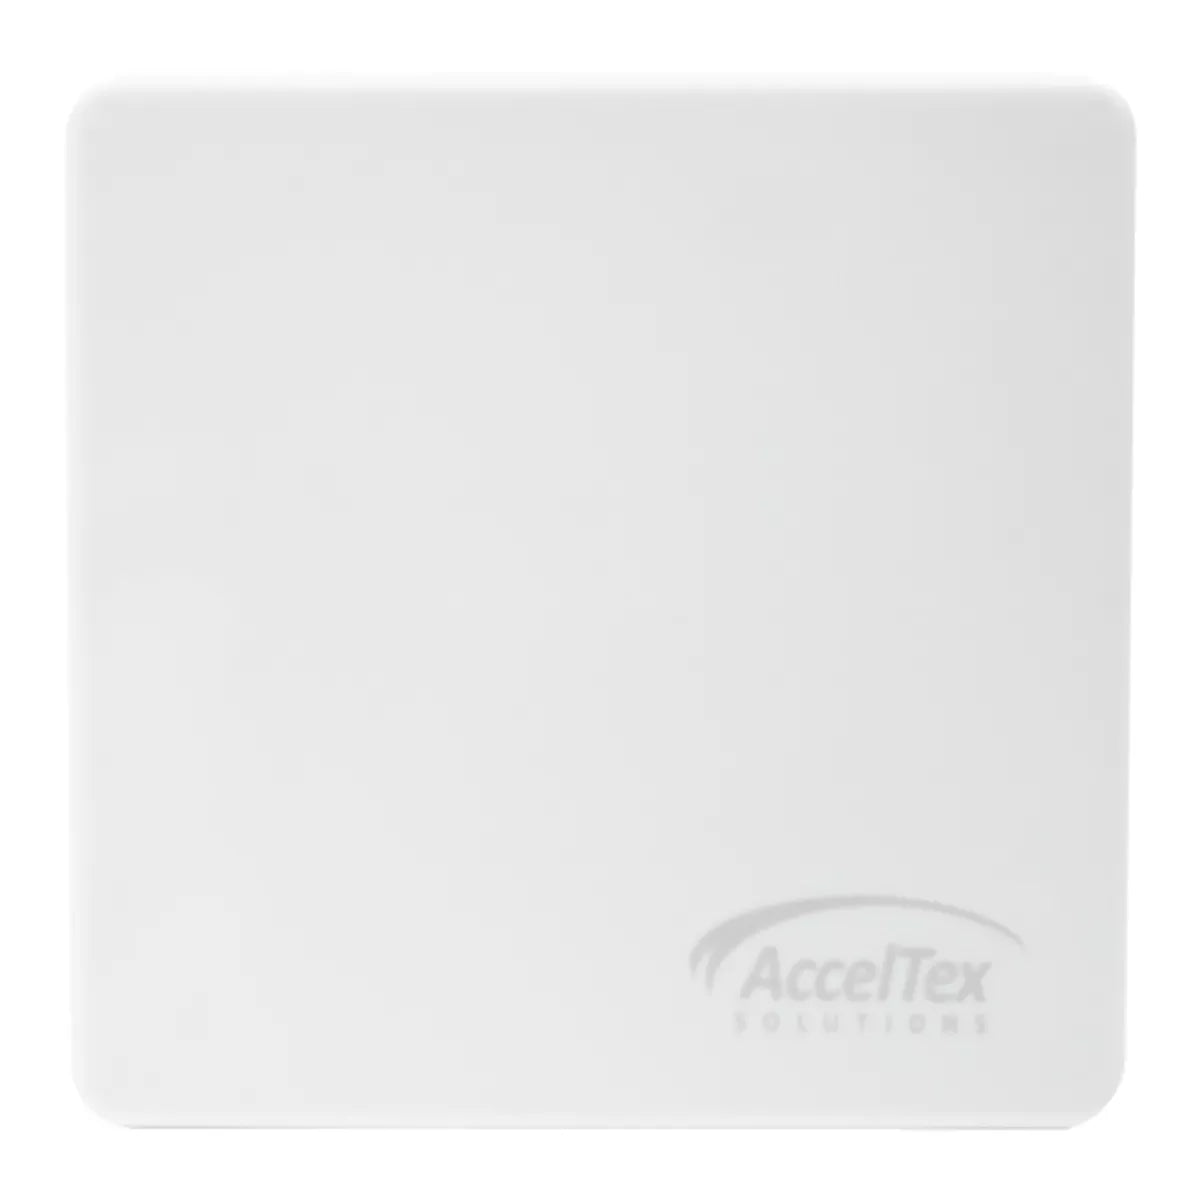 ATS-OP-245-810-Front-1_1200_b919aa54-32d5-4cd8-ad09-af19066db4eb Acceltex 2.4/5 GHz 8/10 dBi 4 Element Indoor/Outdoor Patch Antenna with RPSMA V2 Wi-Fi Antennas acceltex acceltex antennas acceltex patch antenna acceltex solutions patch antenne